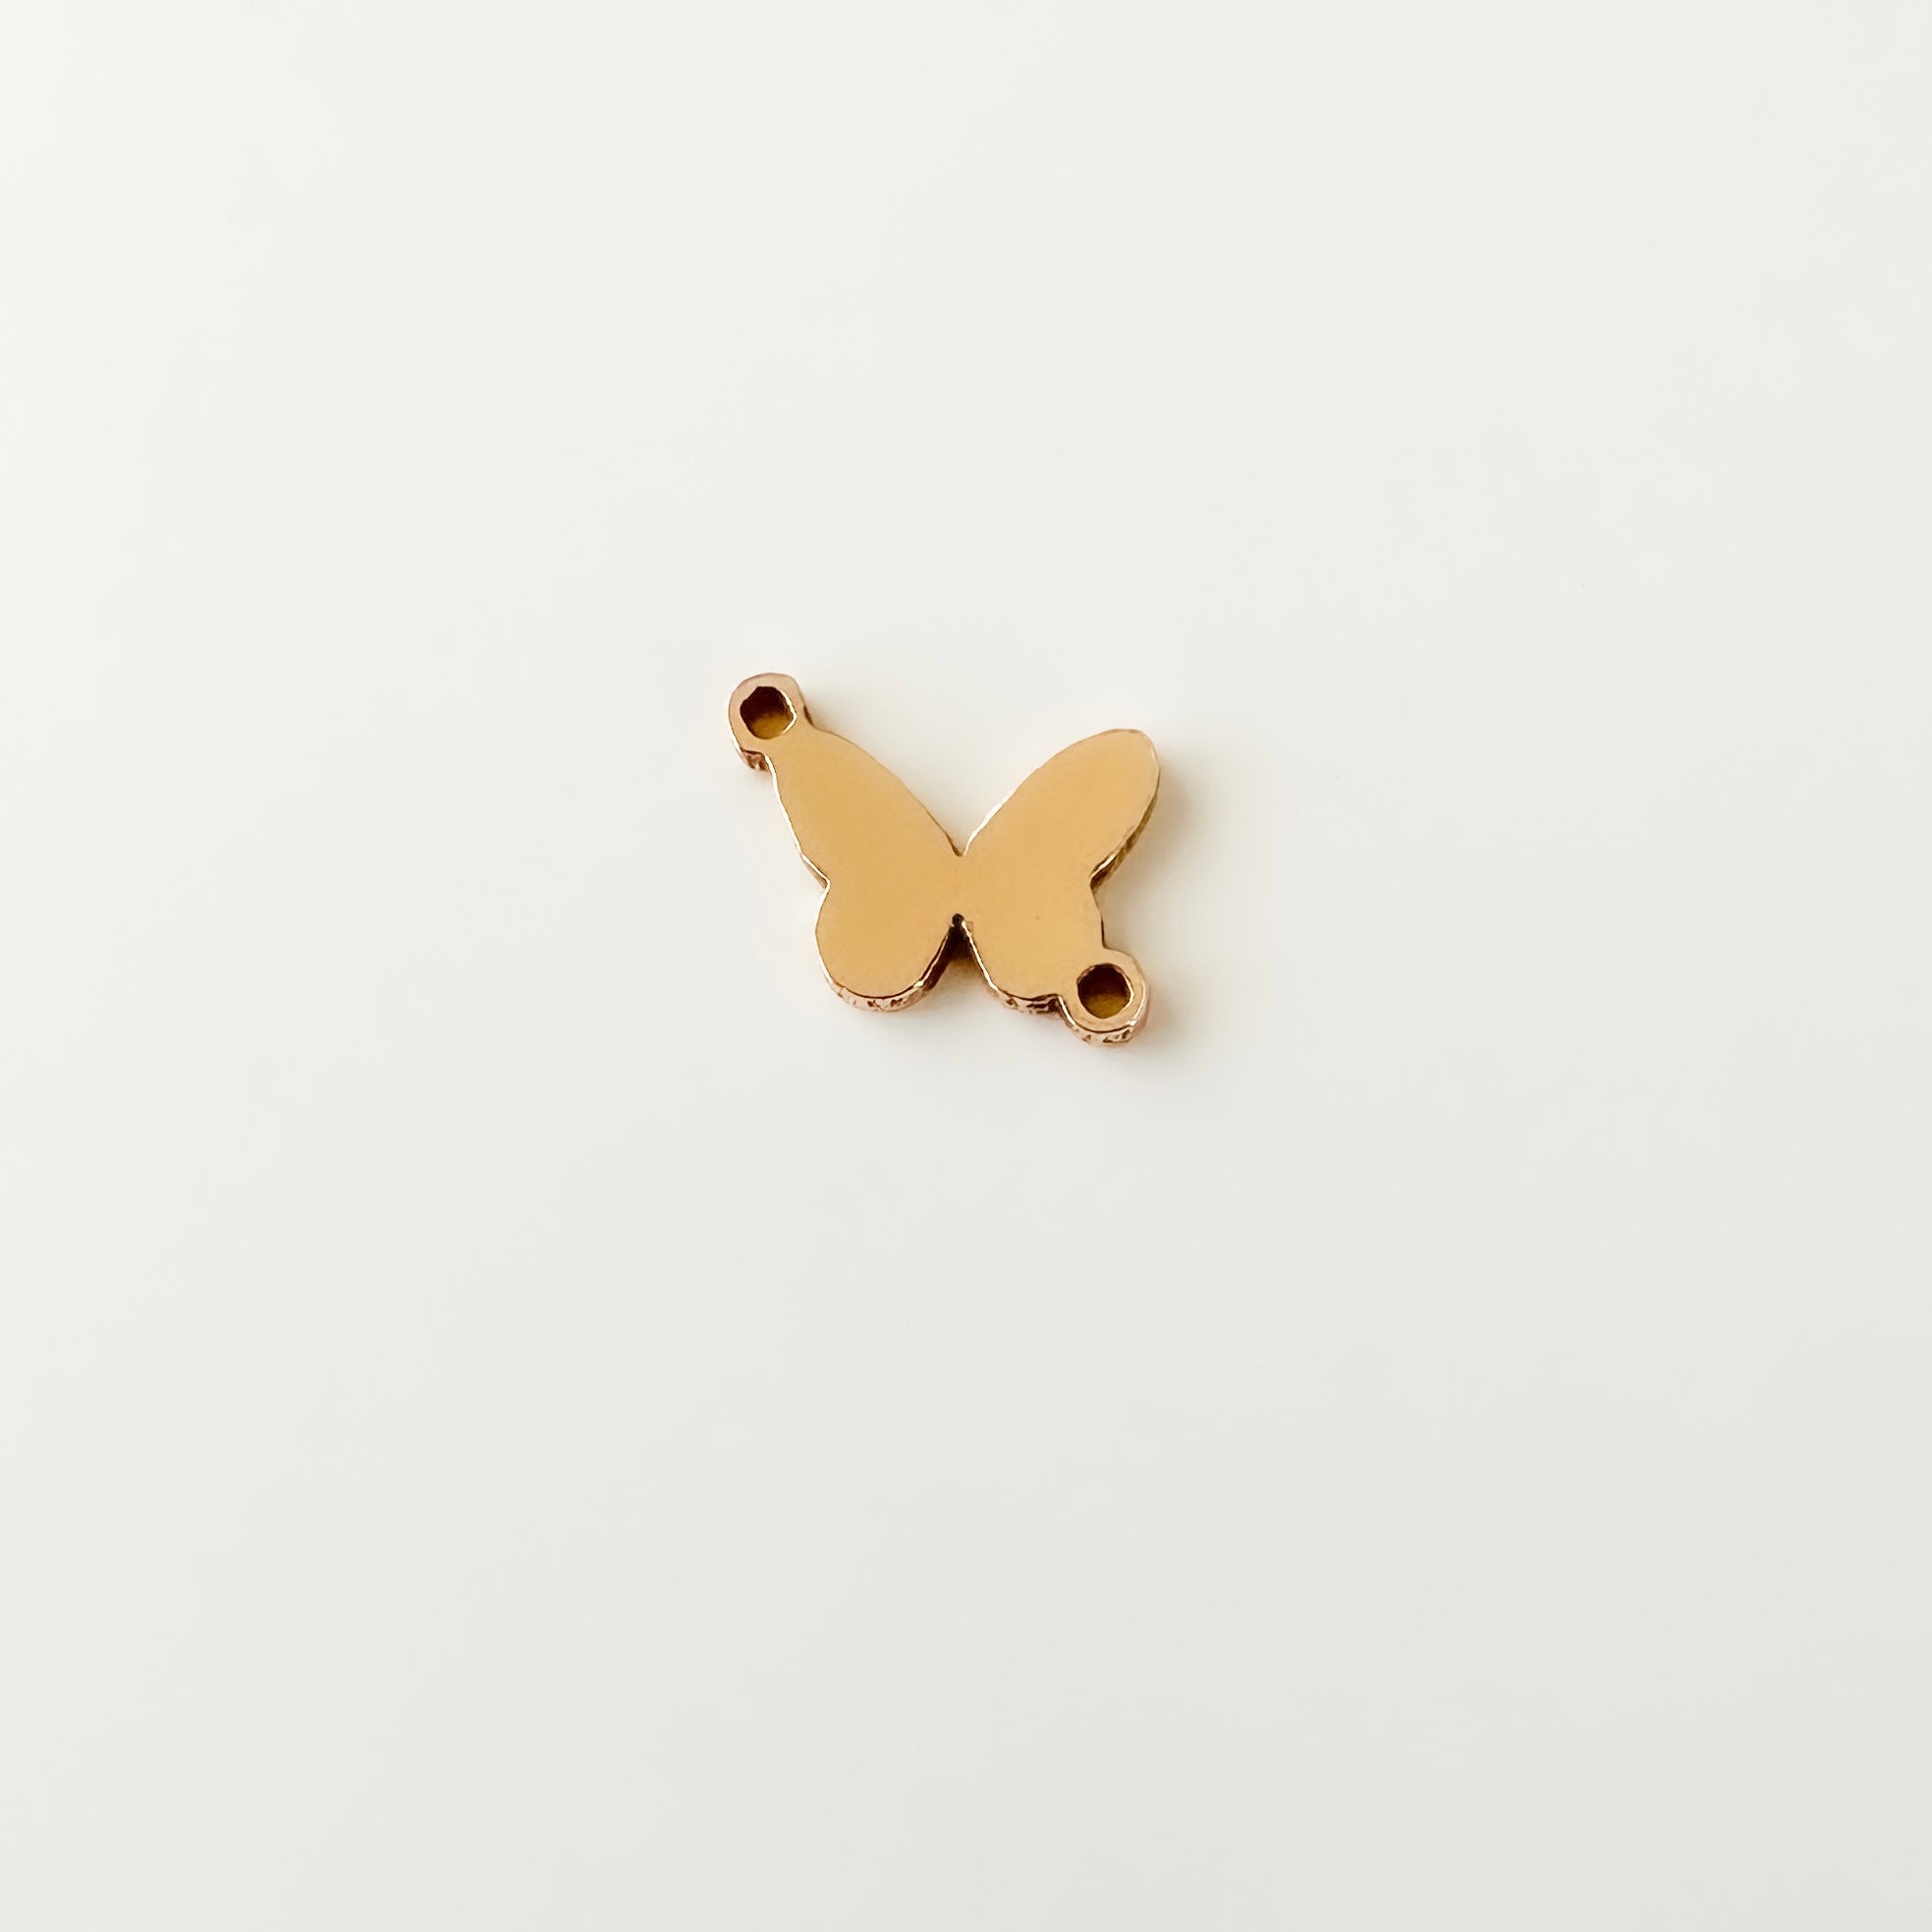 gold filled charm, permanent jewelry charm, gold filled butterfly charm, gold filled connector, permanent jewelry supplies